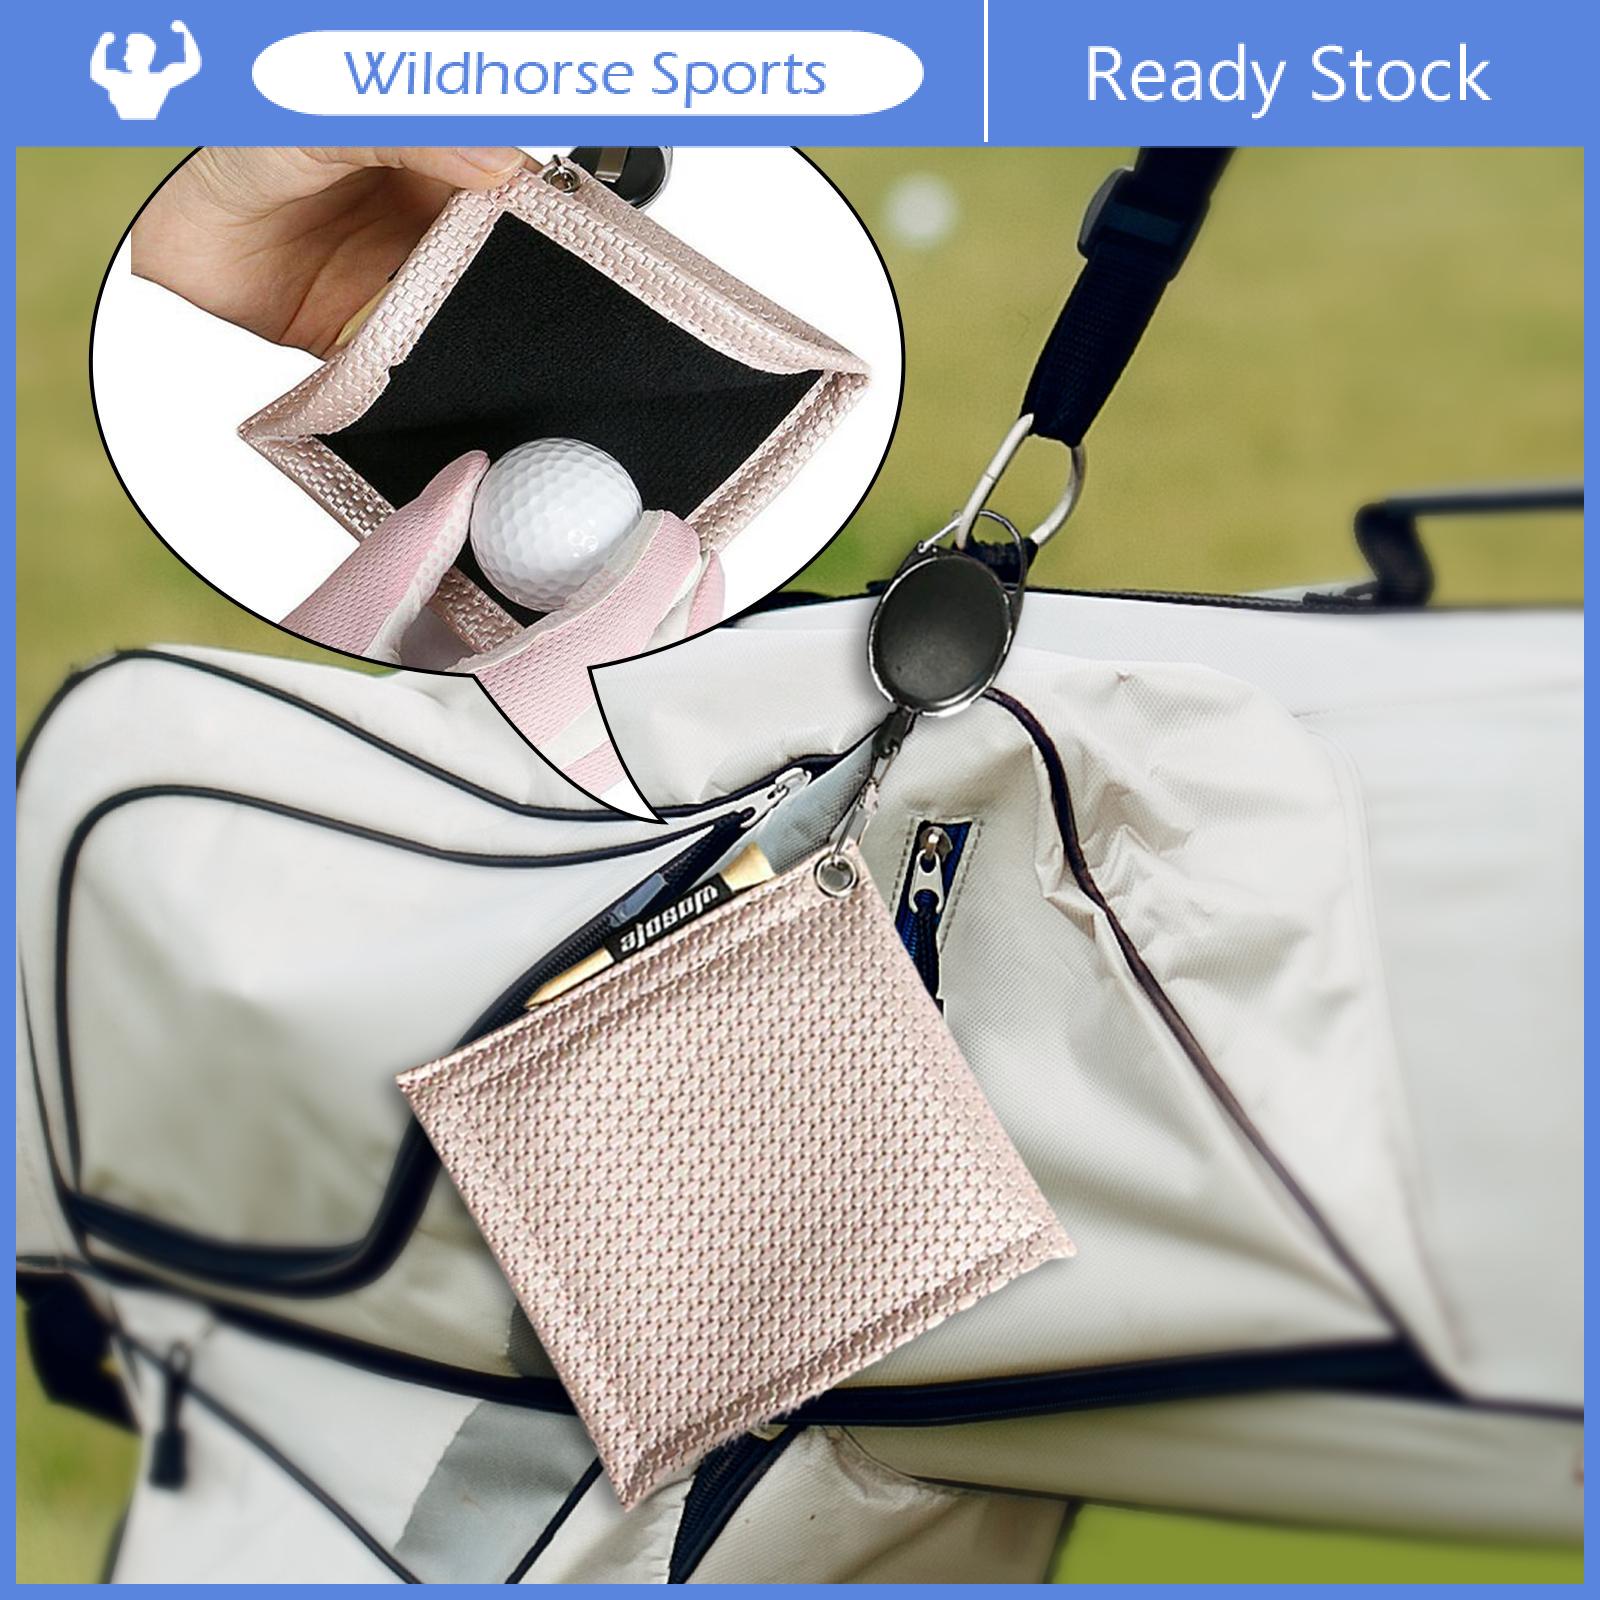 wildhorse Portable Golf Ball Cleaning Towels Club Head Cleaner